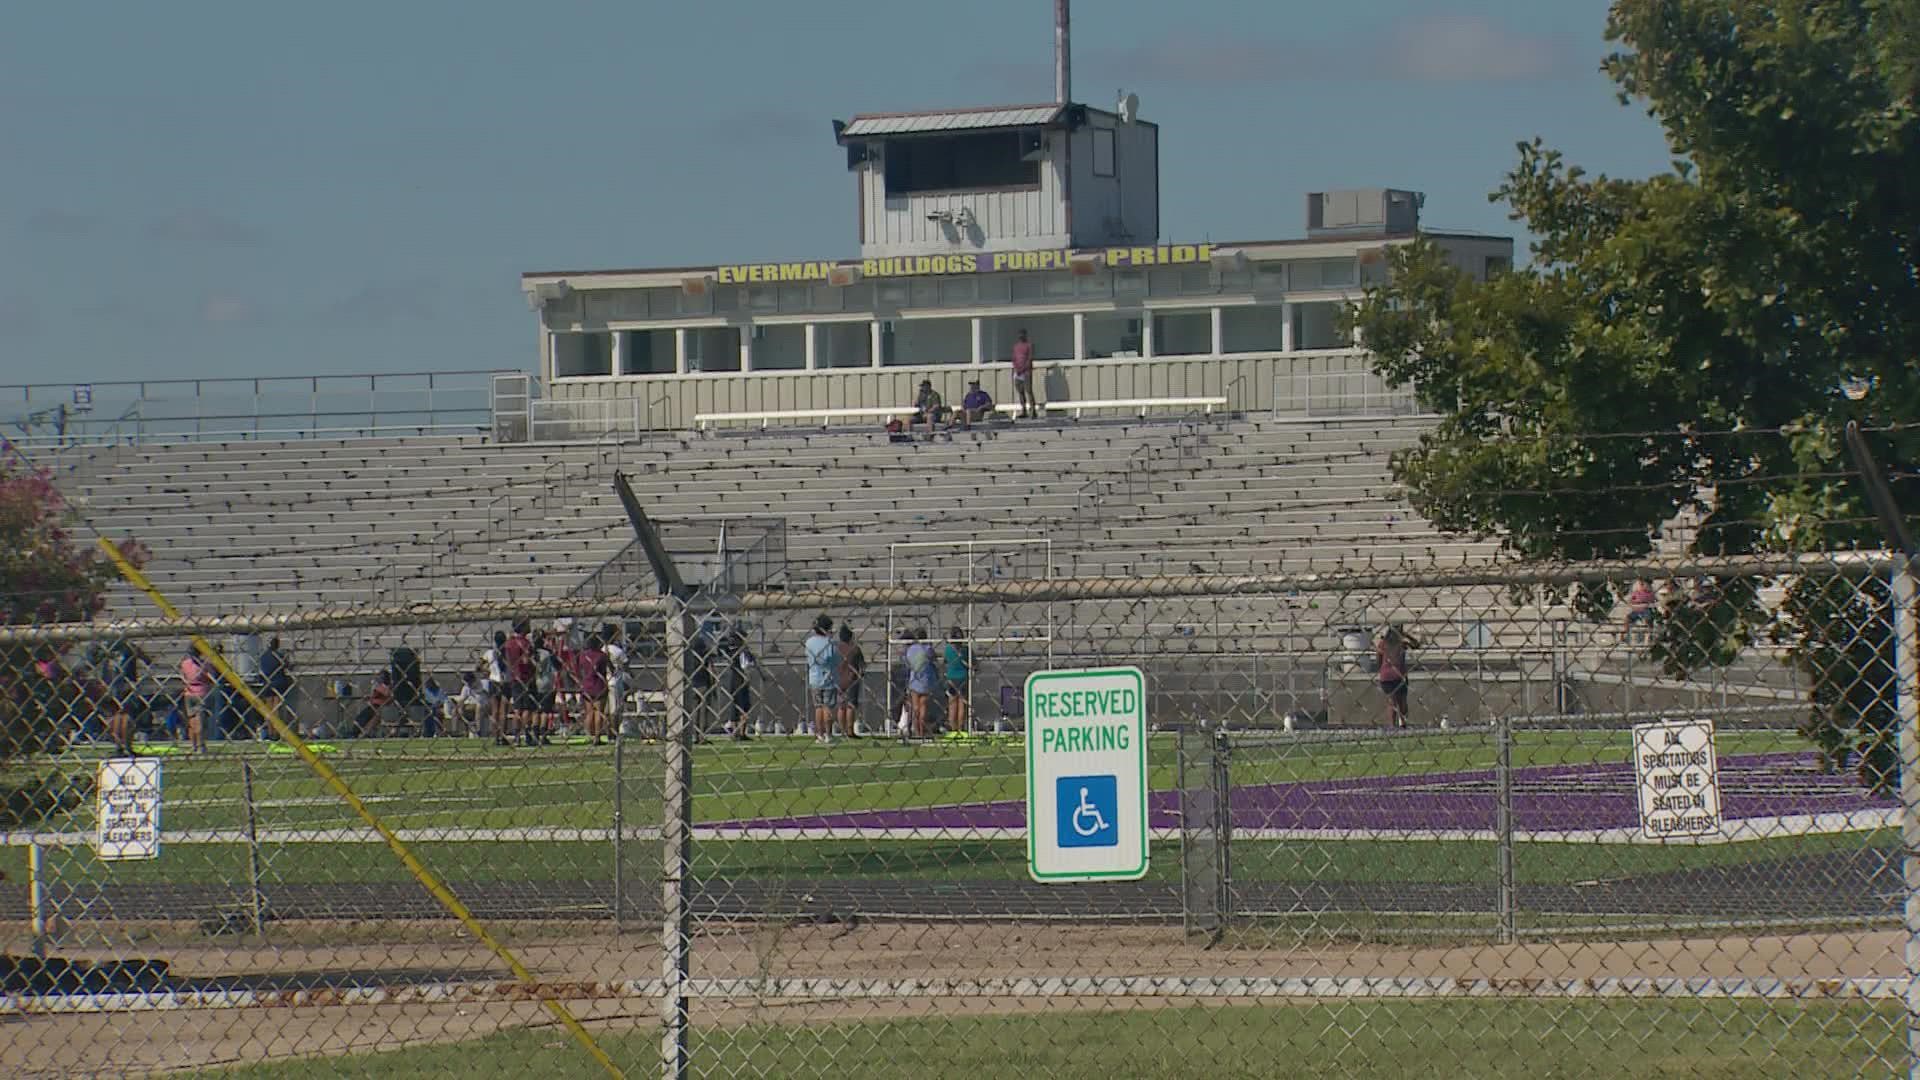 "School security for athletic events involve a lot more than just hiring a couple of police officers." One expert reacts to the incident in Everman, Texas.